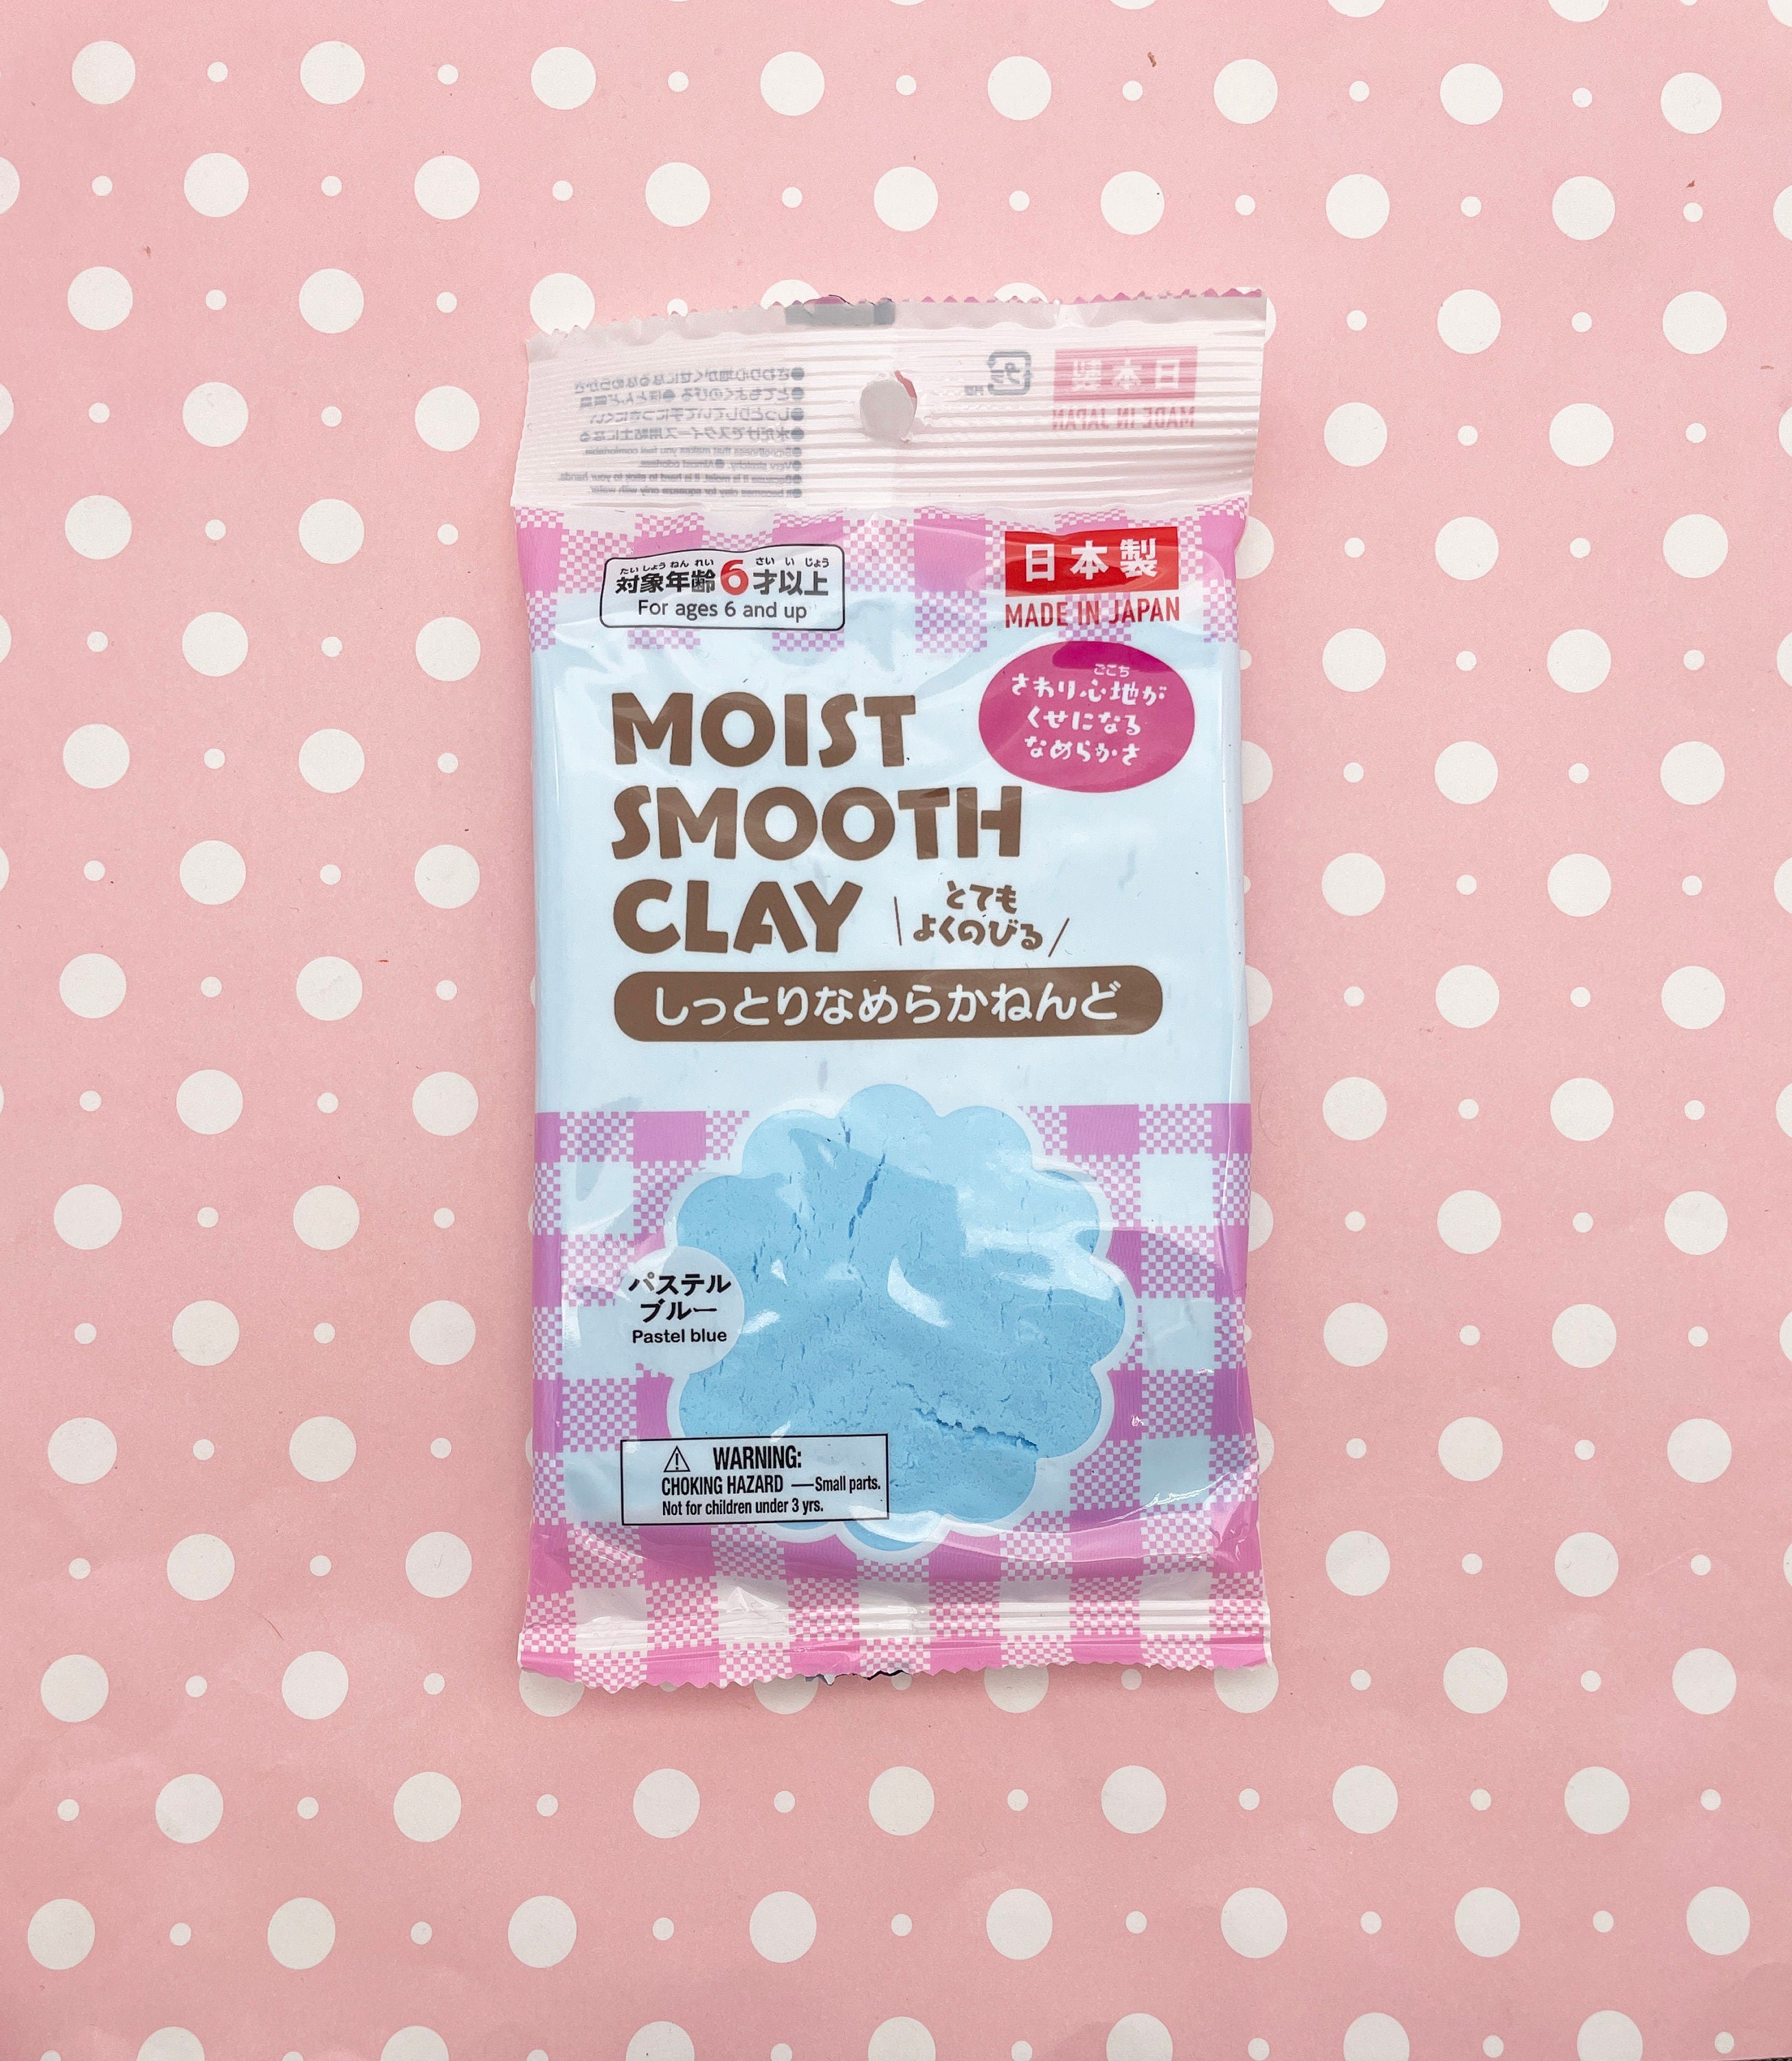 REVIEW: DAISO WHITE POLYMER CLAY New Packaging !! 